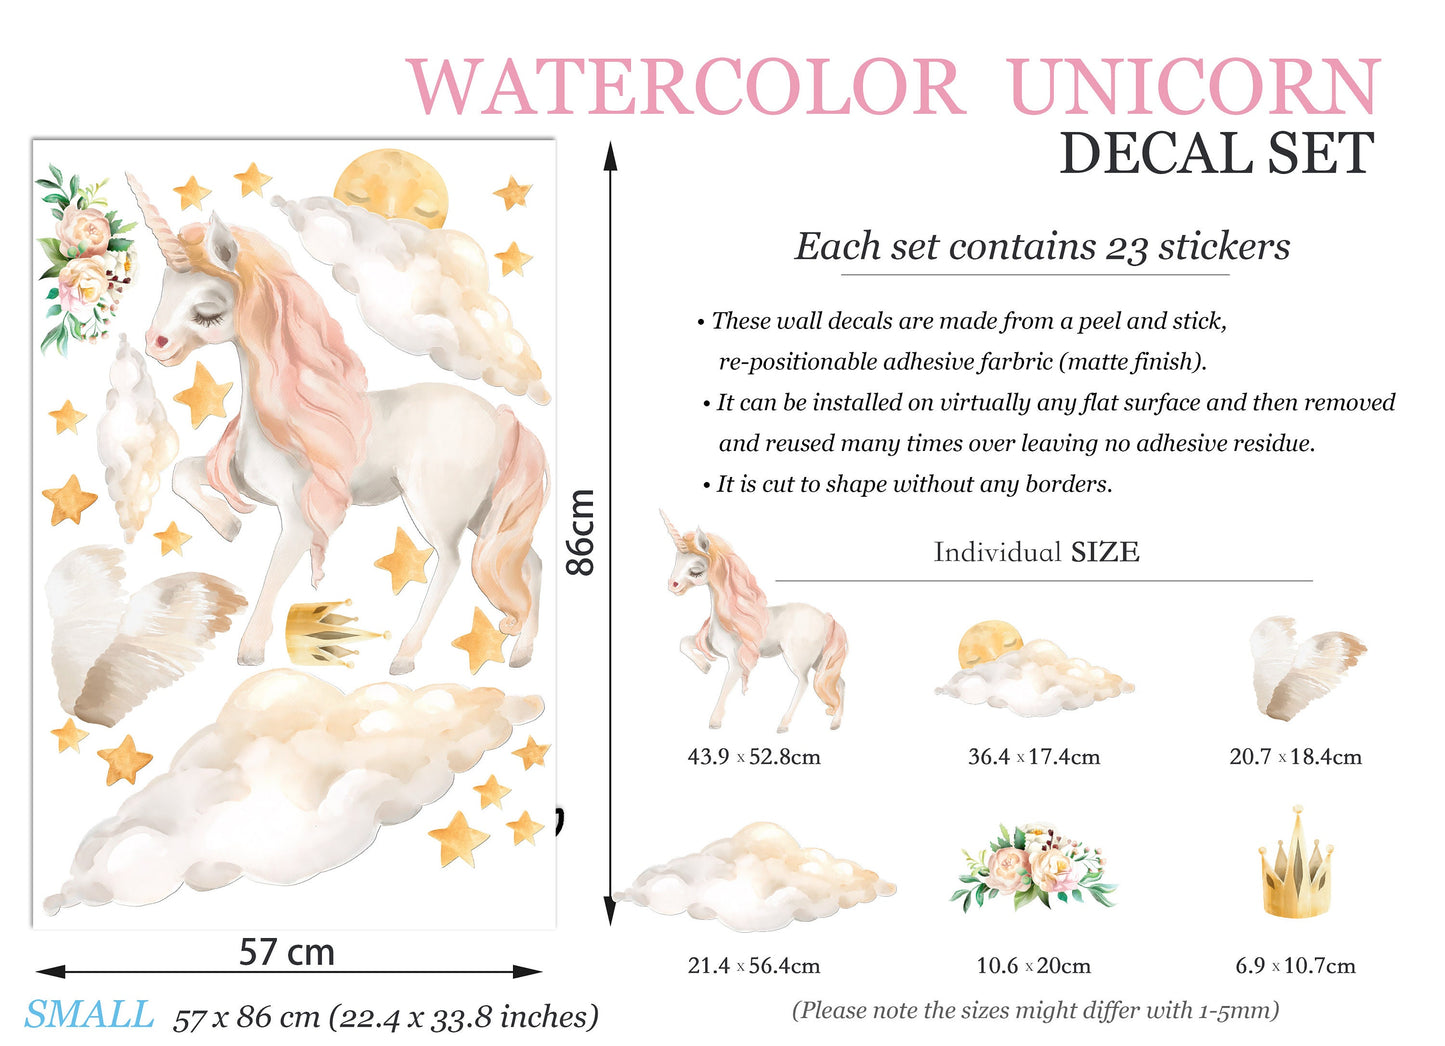 Dancing Unicorn Stroll at Starry Sky Wall Decal - Girl Room Decor - Removable Peel and Stick - BR110